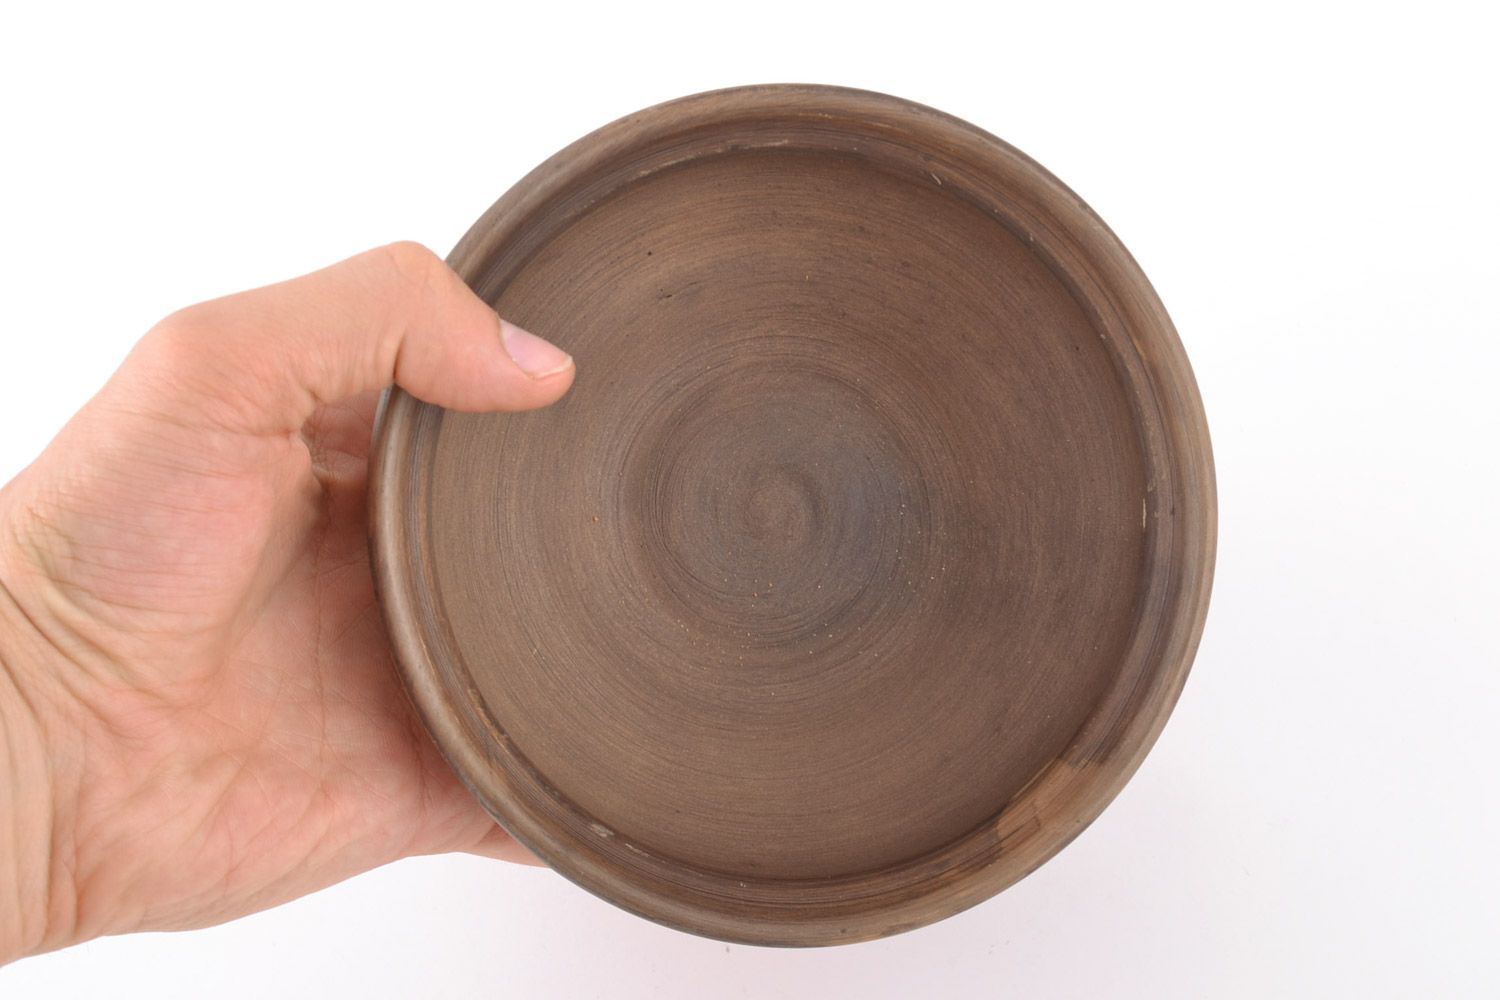 Clay handmade bowl 250 ml of brown color beautiful unusual eco friendly kitchen decor photo 3